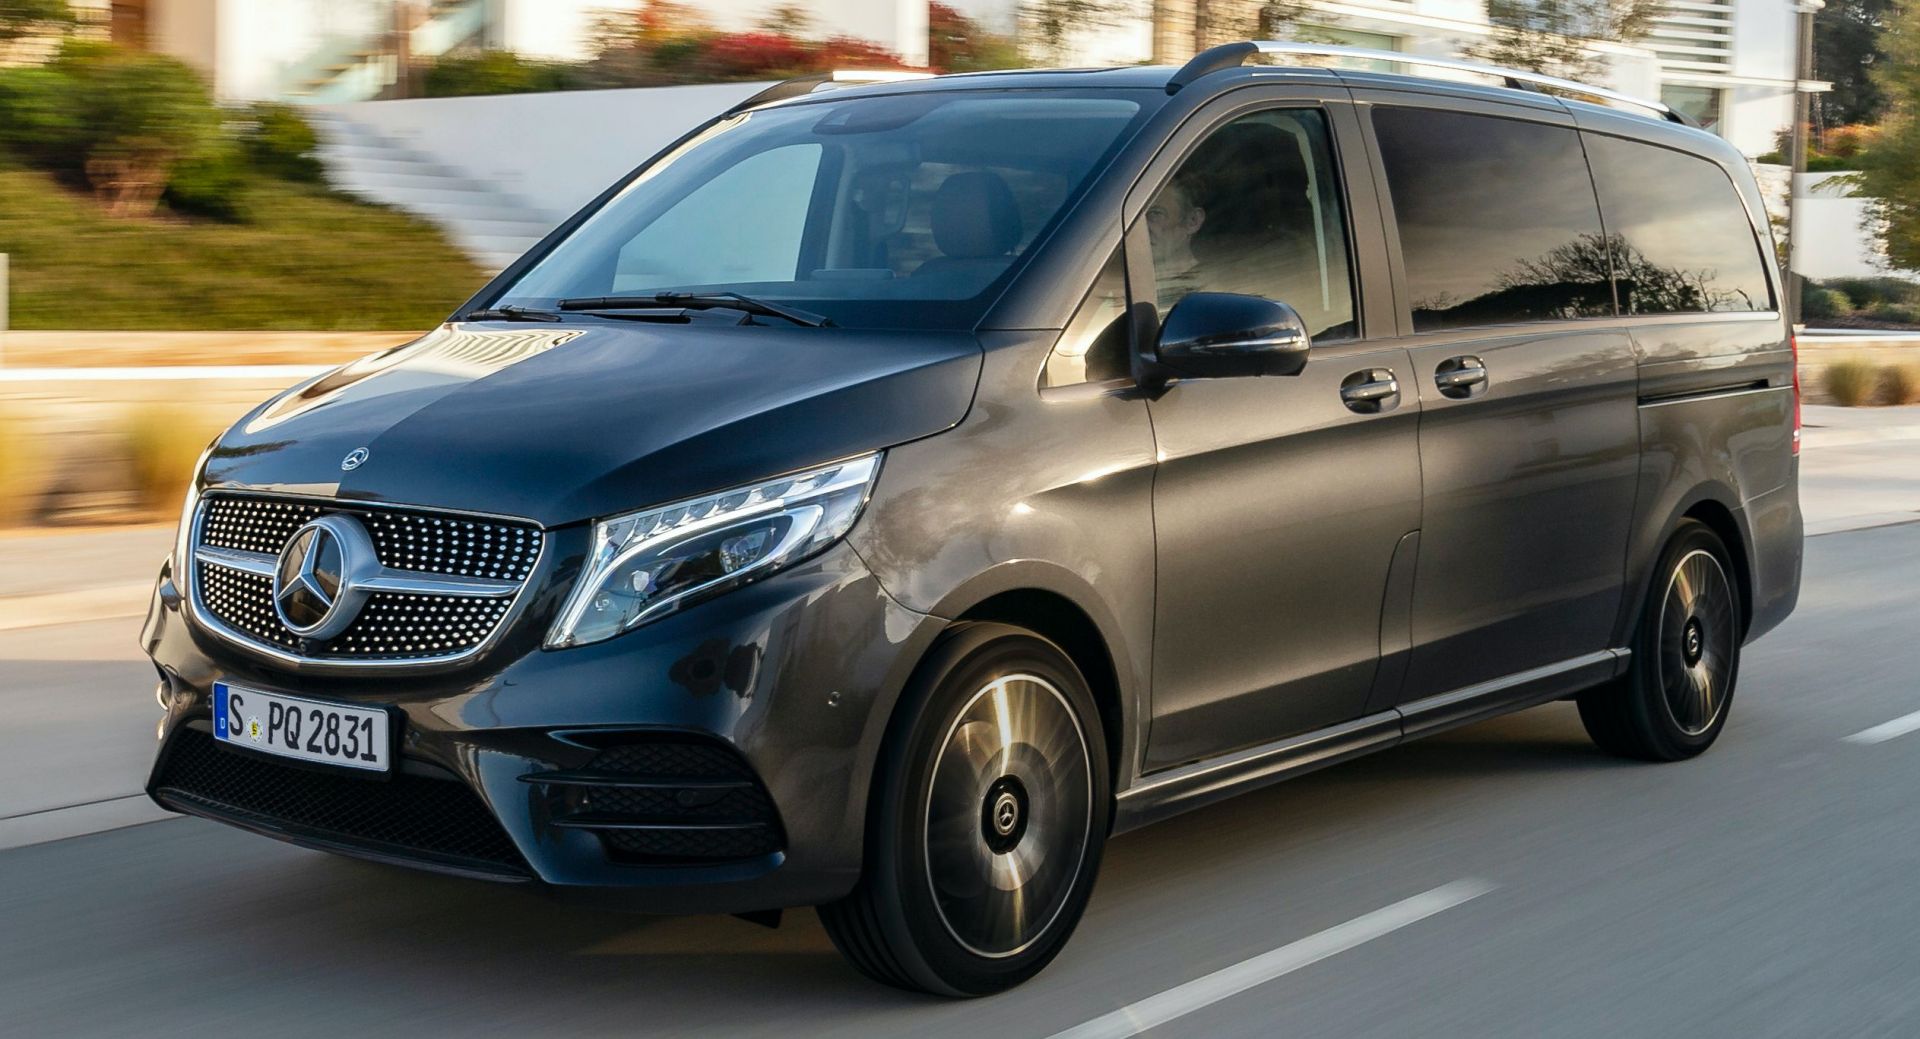 Mercedes Benz V Class Now Comfier Thanks To Airmatic Air Suspension Carscoops